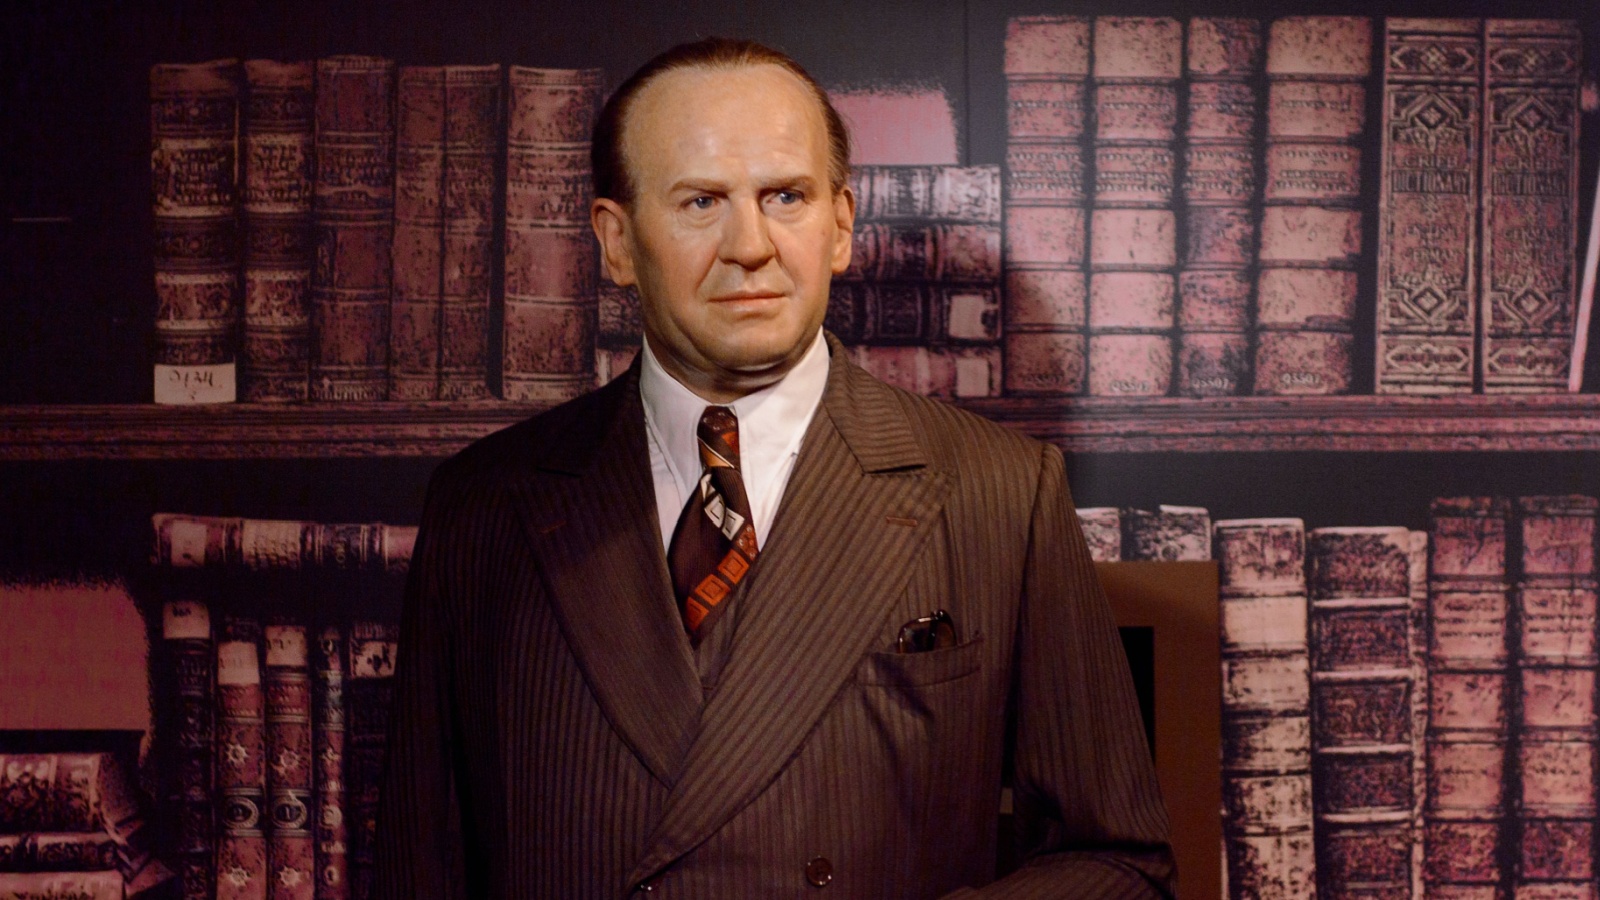 image credit: Anton Ivanov/Shutterstock <p>Known largely through the lens of Spielberg’s “Schindler’s List,” Oskar Schindler’s real-life story is just as compelling. A member of the Nazi Party, Schindler used his position and resources to save the lives of more than 1,200 Jews during the Holocaust by employing them in his factories. His transformation from a war profiteer to a savior showcases the complexity of human nature and the capacity for redemption and courage. Schindler’s legacy is a powerful reminder that one person can make a difference, even amidst the darkest of times.</p>